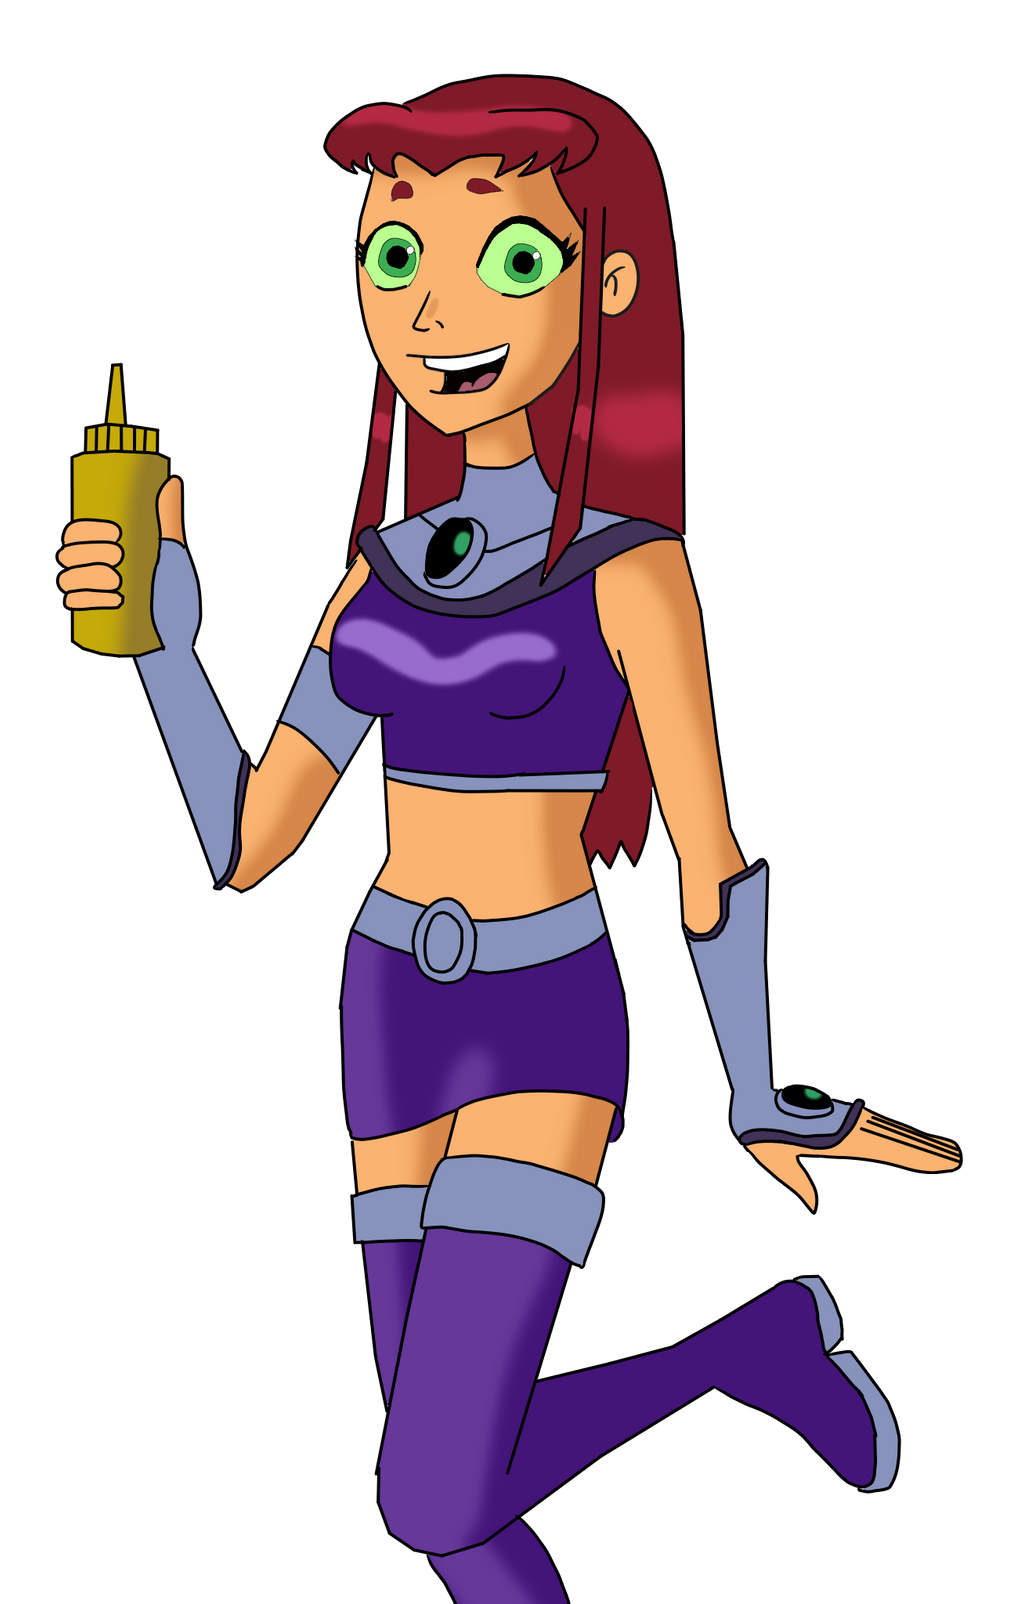 Starfire and Mustard by CaptainEdwardTeague on DeviantArt